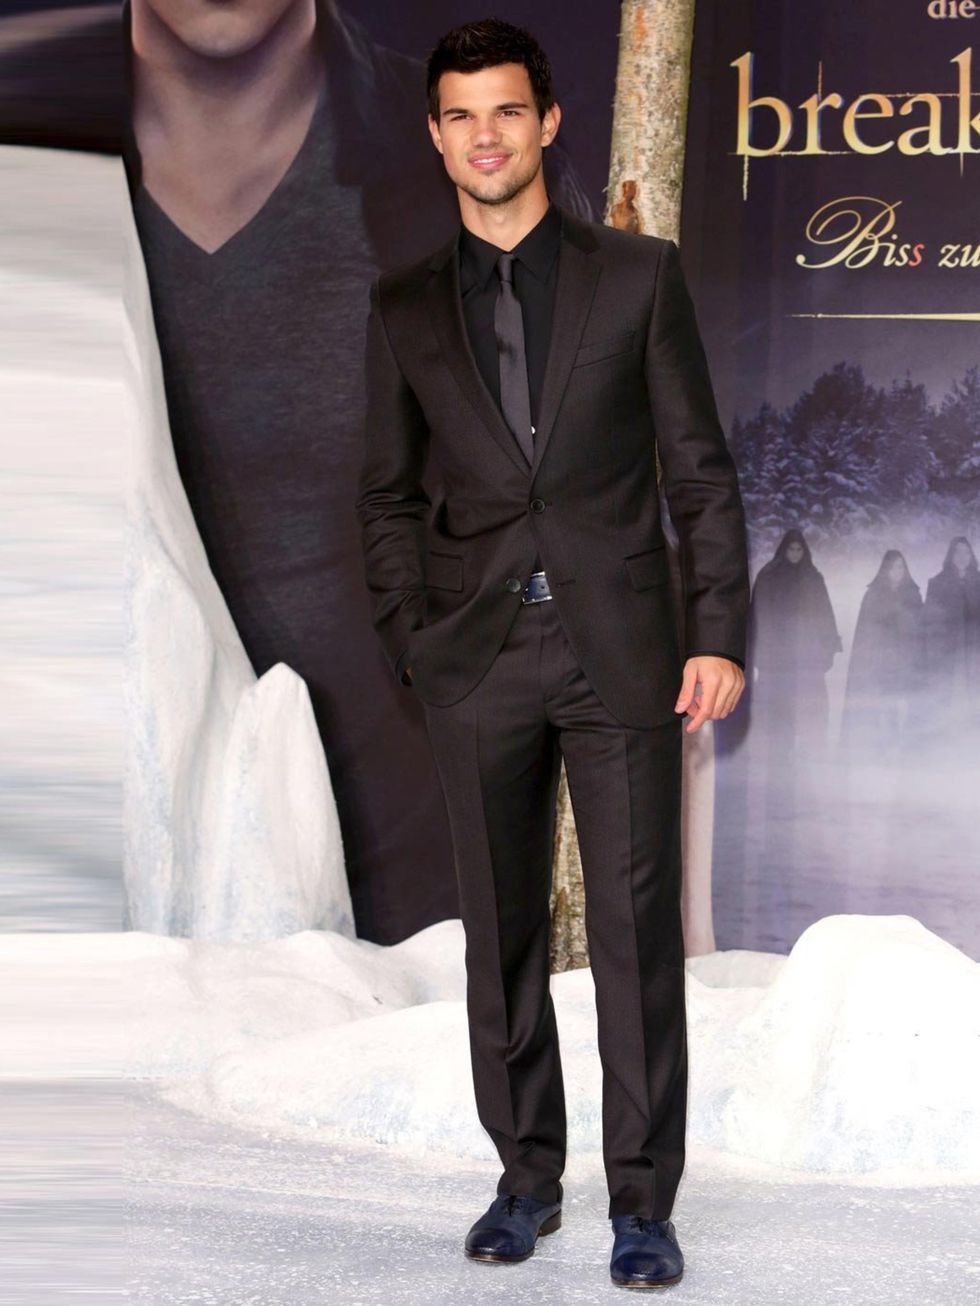 <p>Taylor Lautner wears a black suit, shirt and tie to the Twilight Breaking Dawn Part 2 premiere, Berlin.</p>